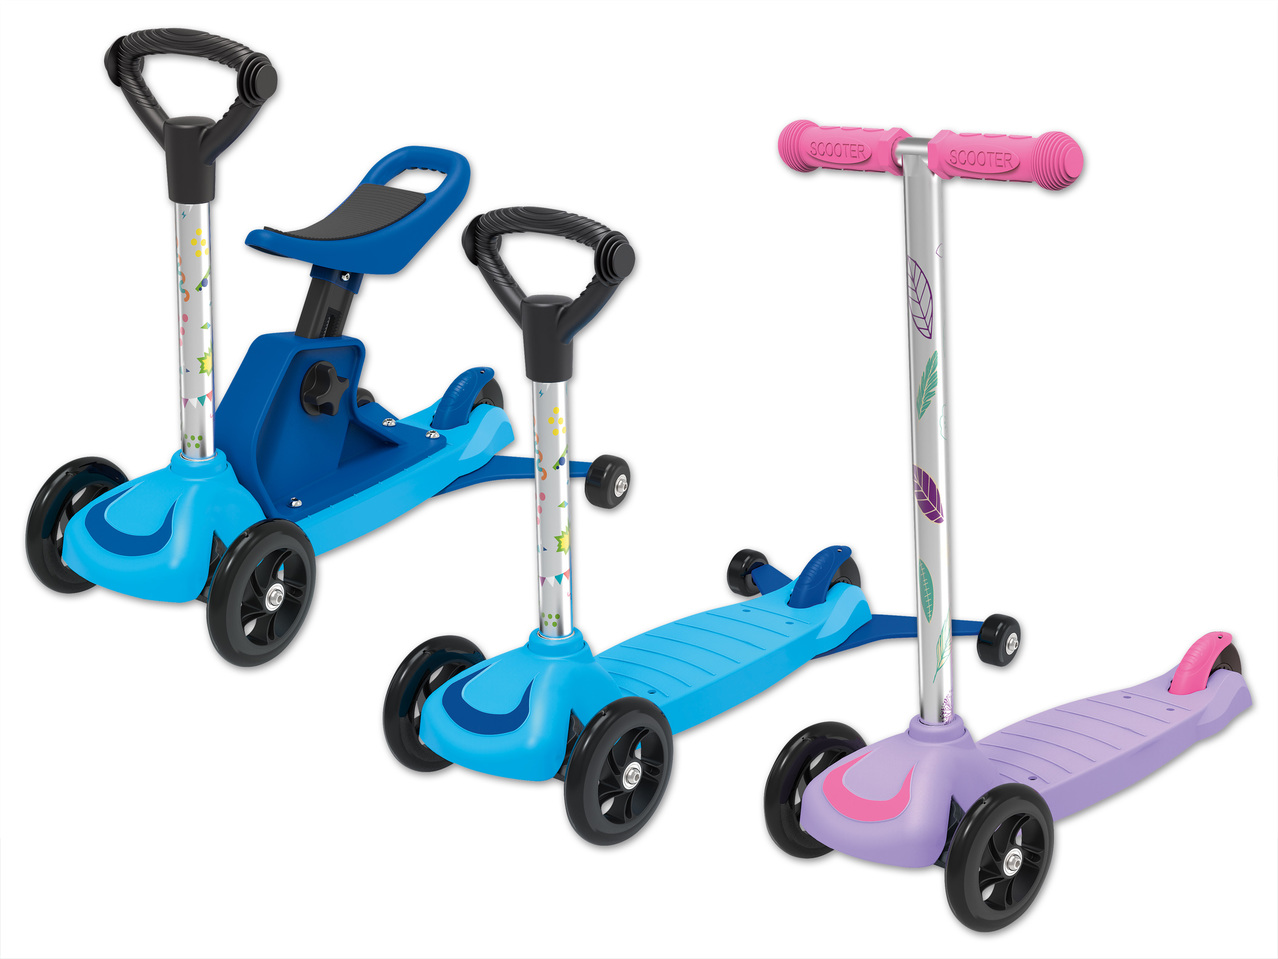 PLAYTIVE JUNIOR(R) Scooter 3-in-1